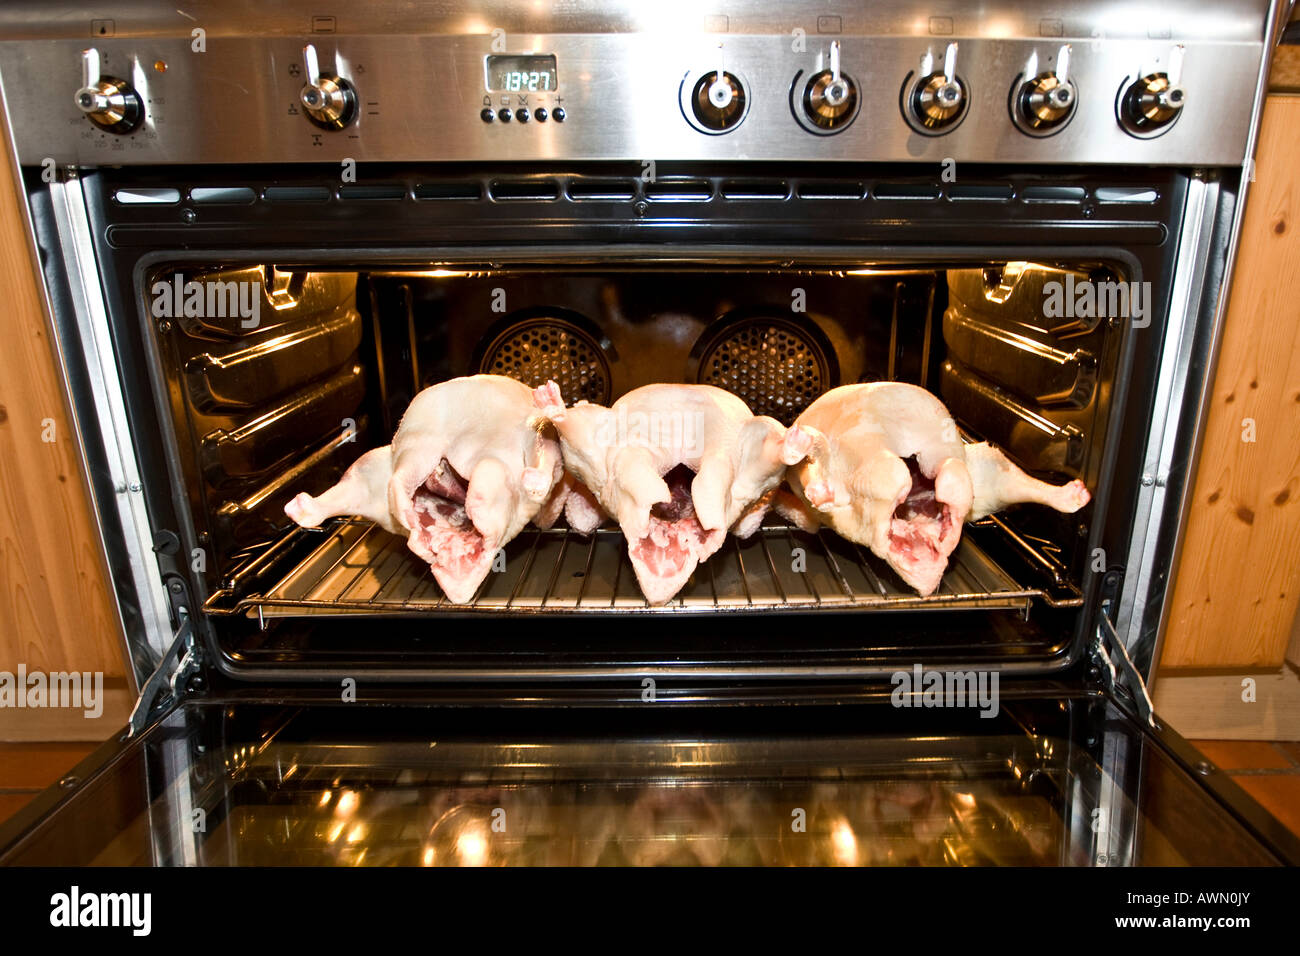 Three prepared geese waiting to be baked, lying in the oven Stock Photo